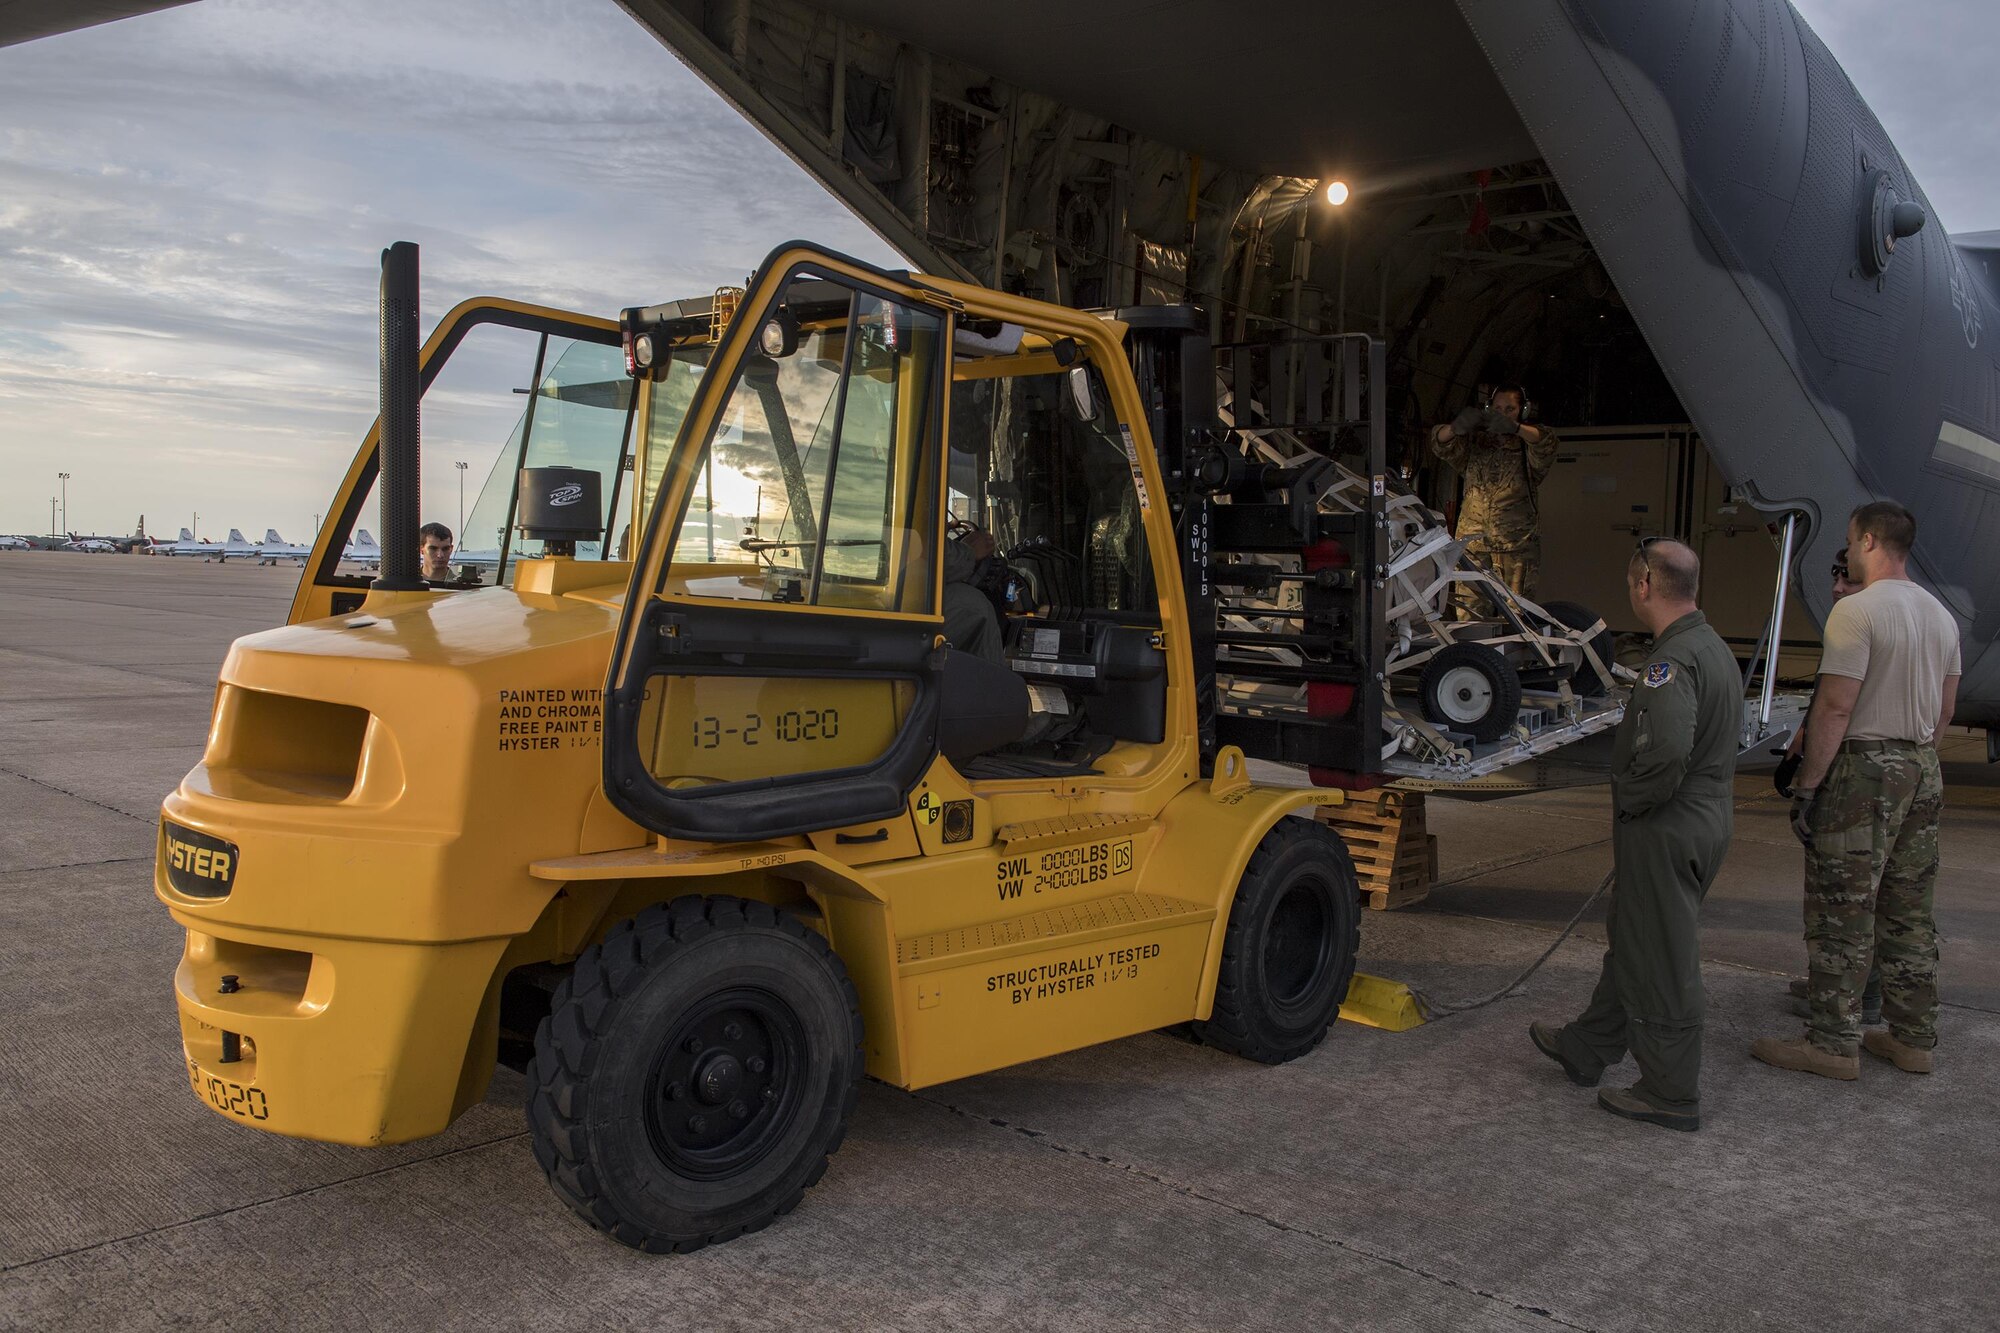 Master Sgt. McBride, 71st Rescue Squadron loadmaster unloads cargo from an HC-130J Combat King II, Aug. 26, 2017, at Naval Air Station Fort Worth Joint Reserve Base, Texas.